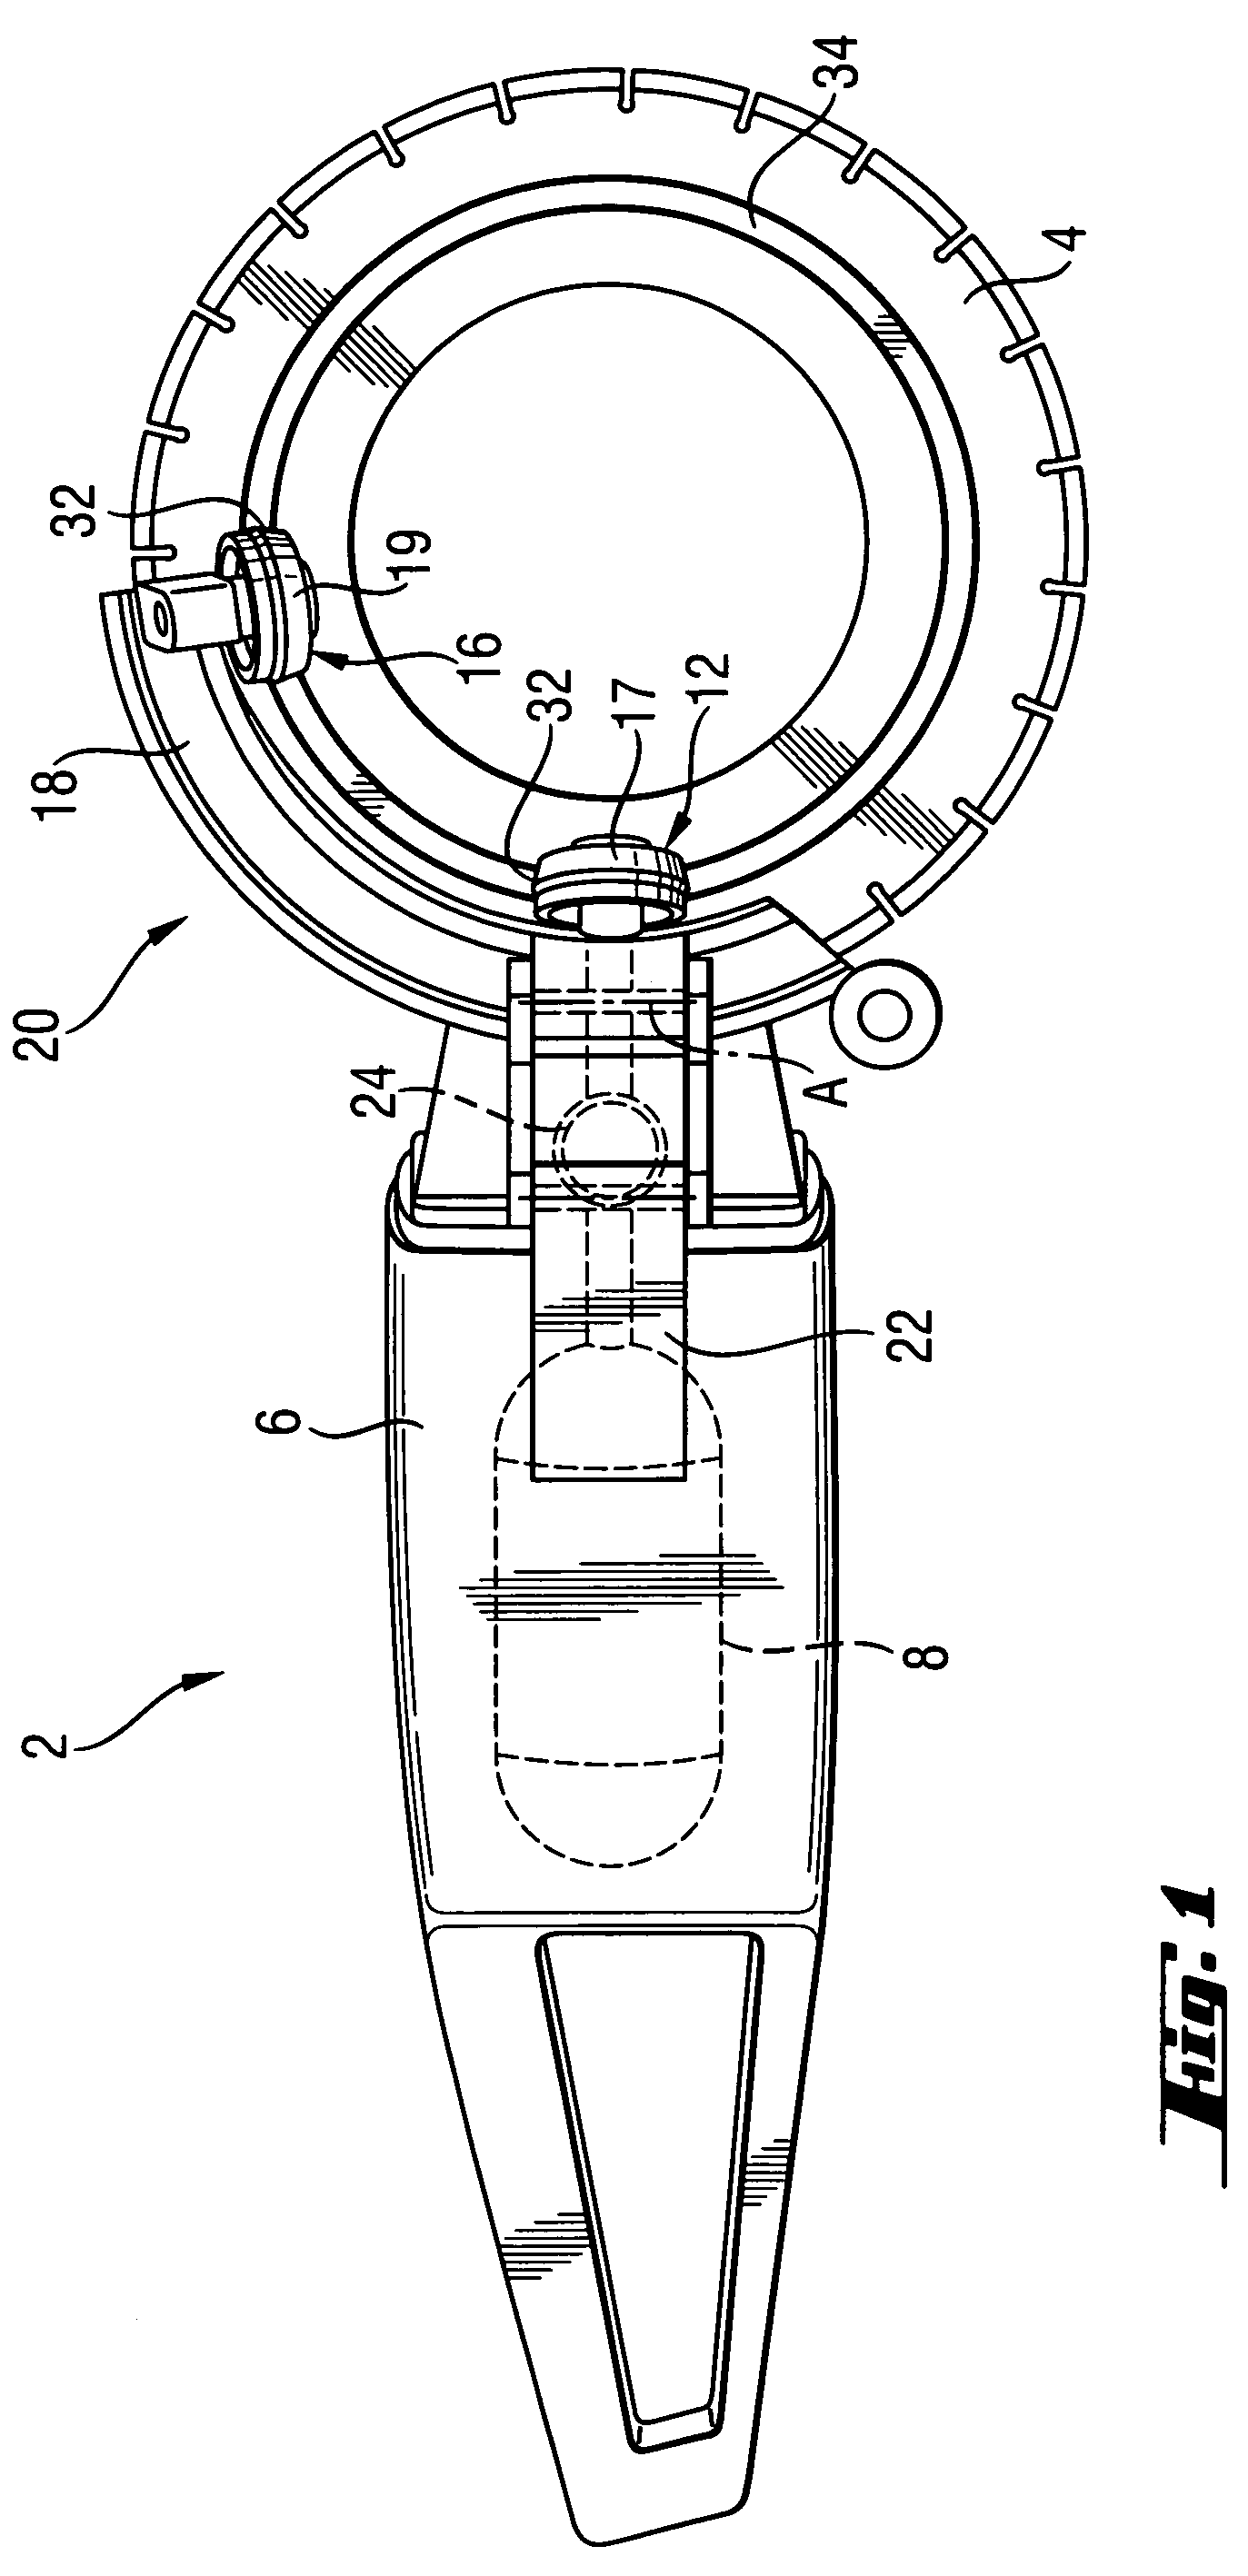 Power tool with an eccentrically driven working tool